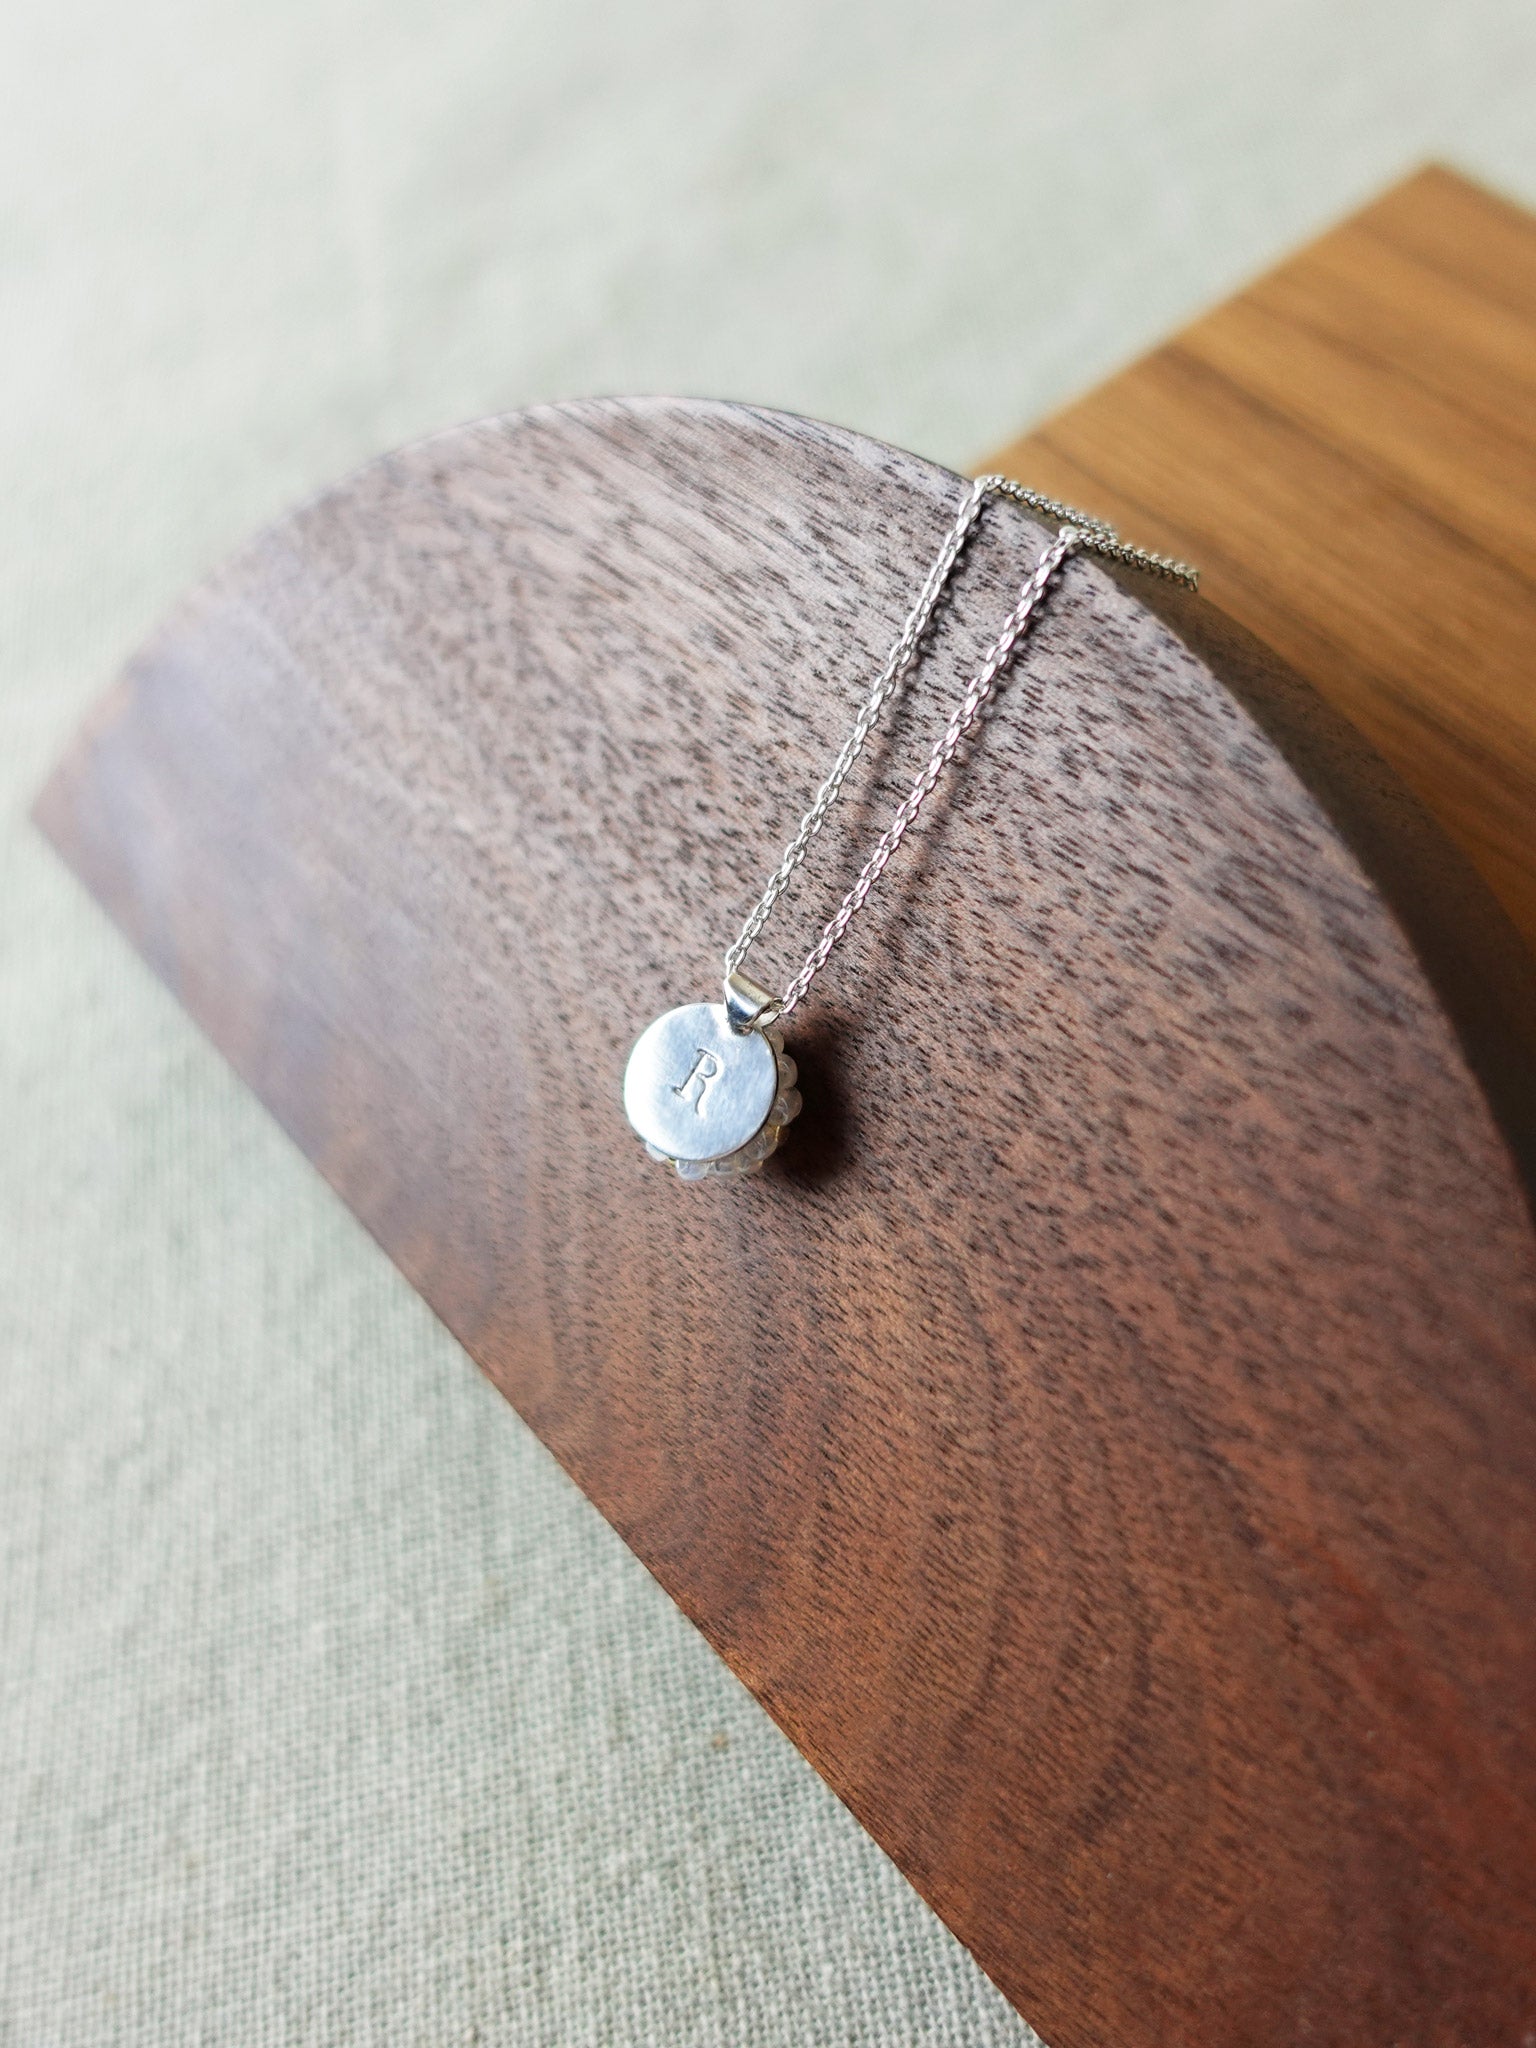 Star Dust Petite Necklace in White Initials